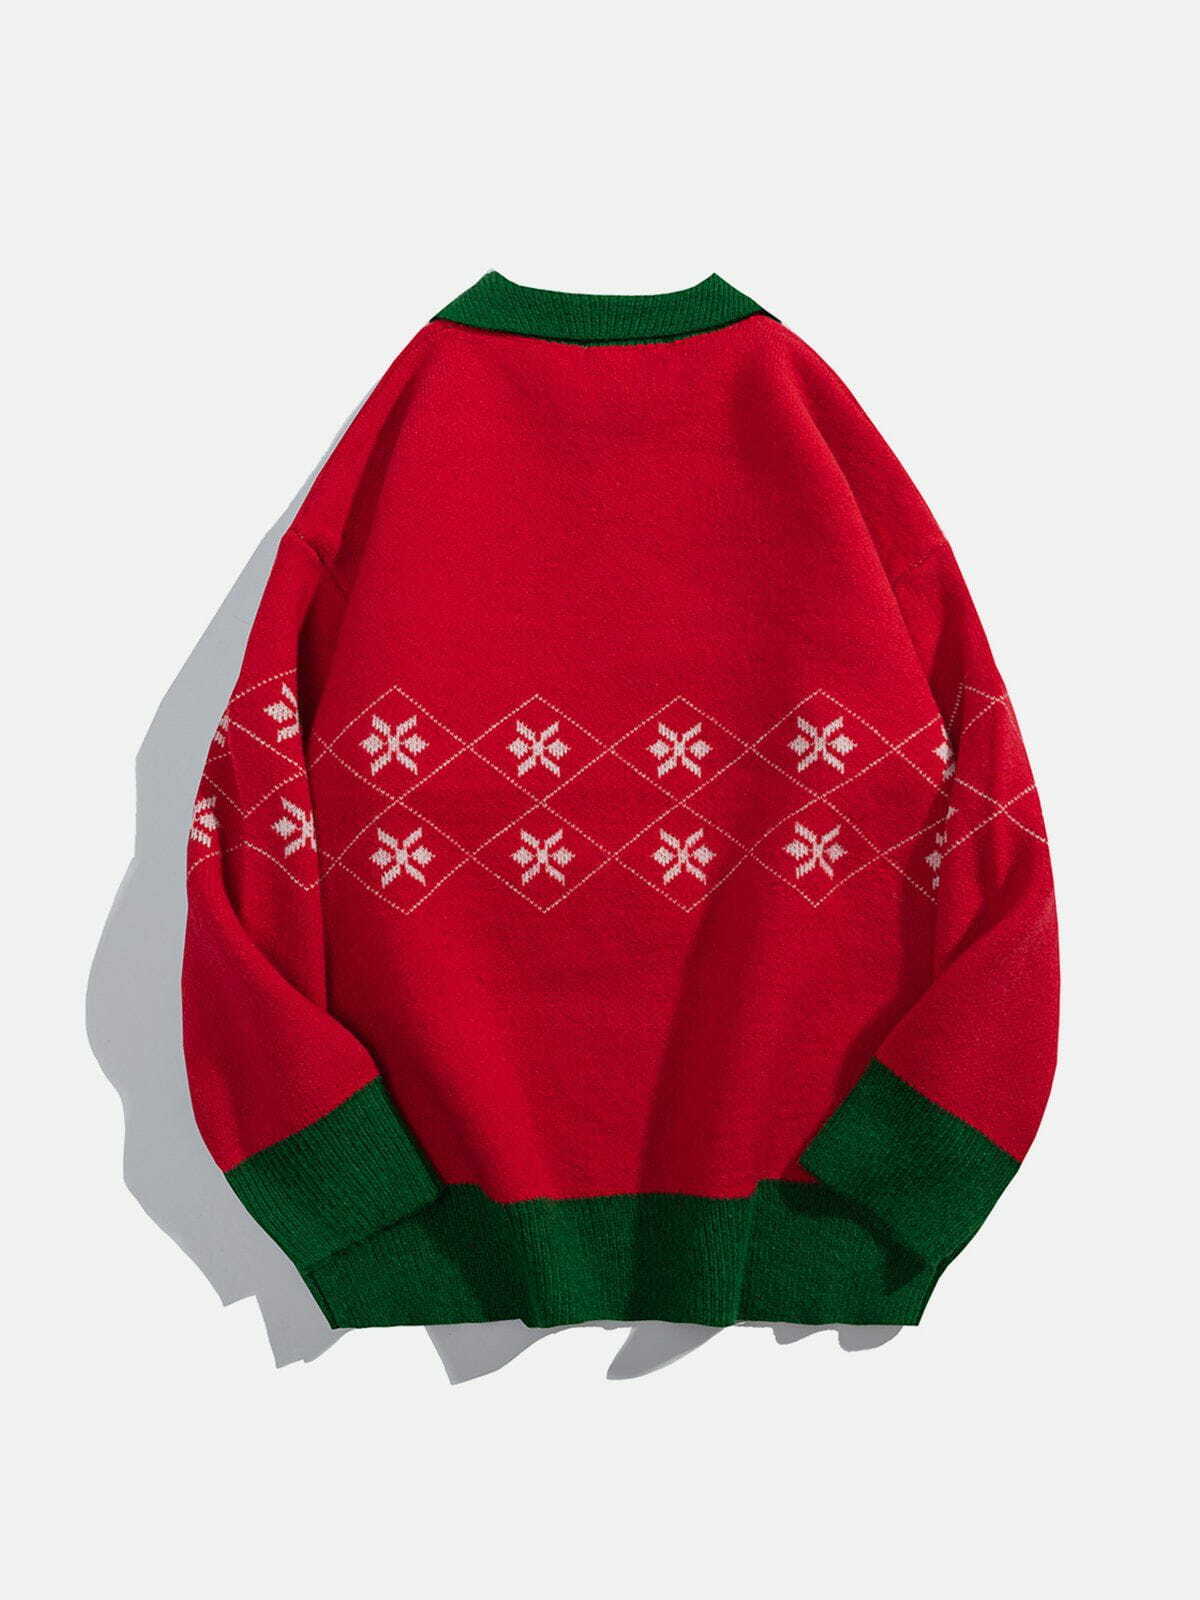 festive santa claus polo sweater playful & vibrant holiday style 7307